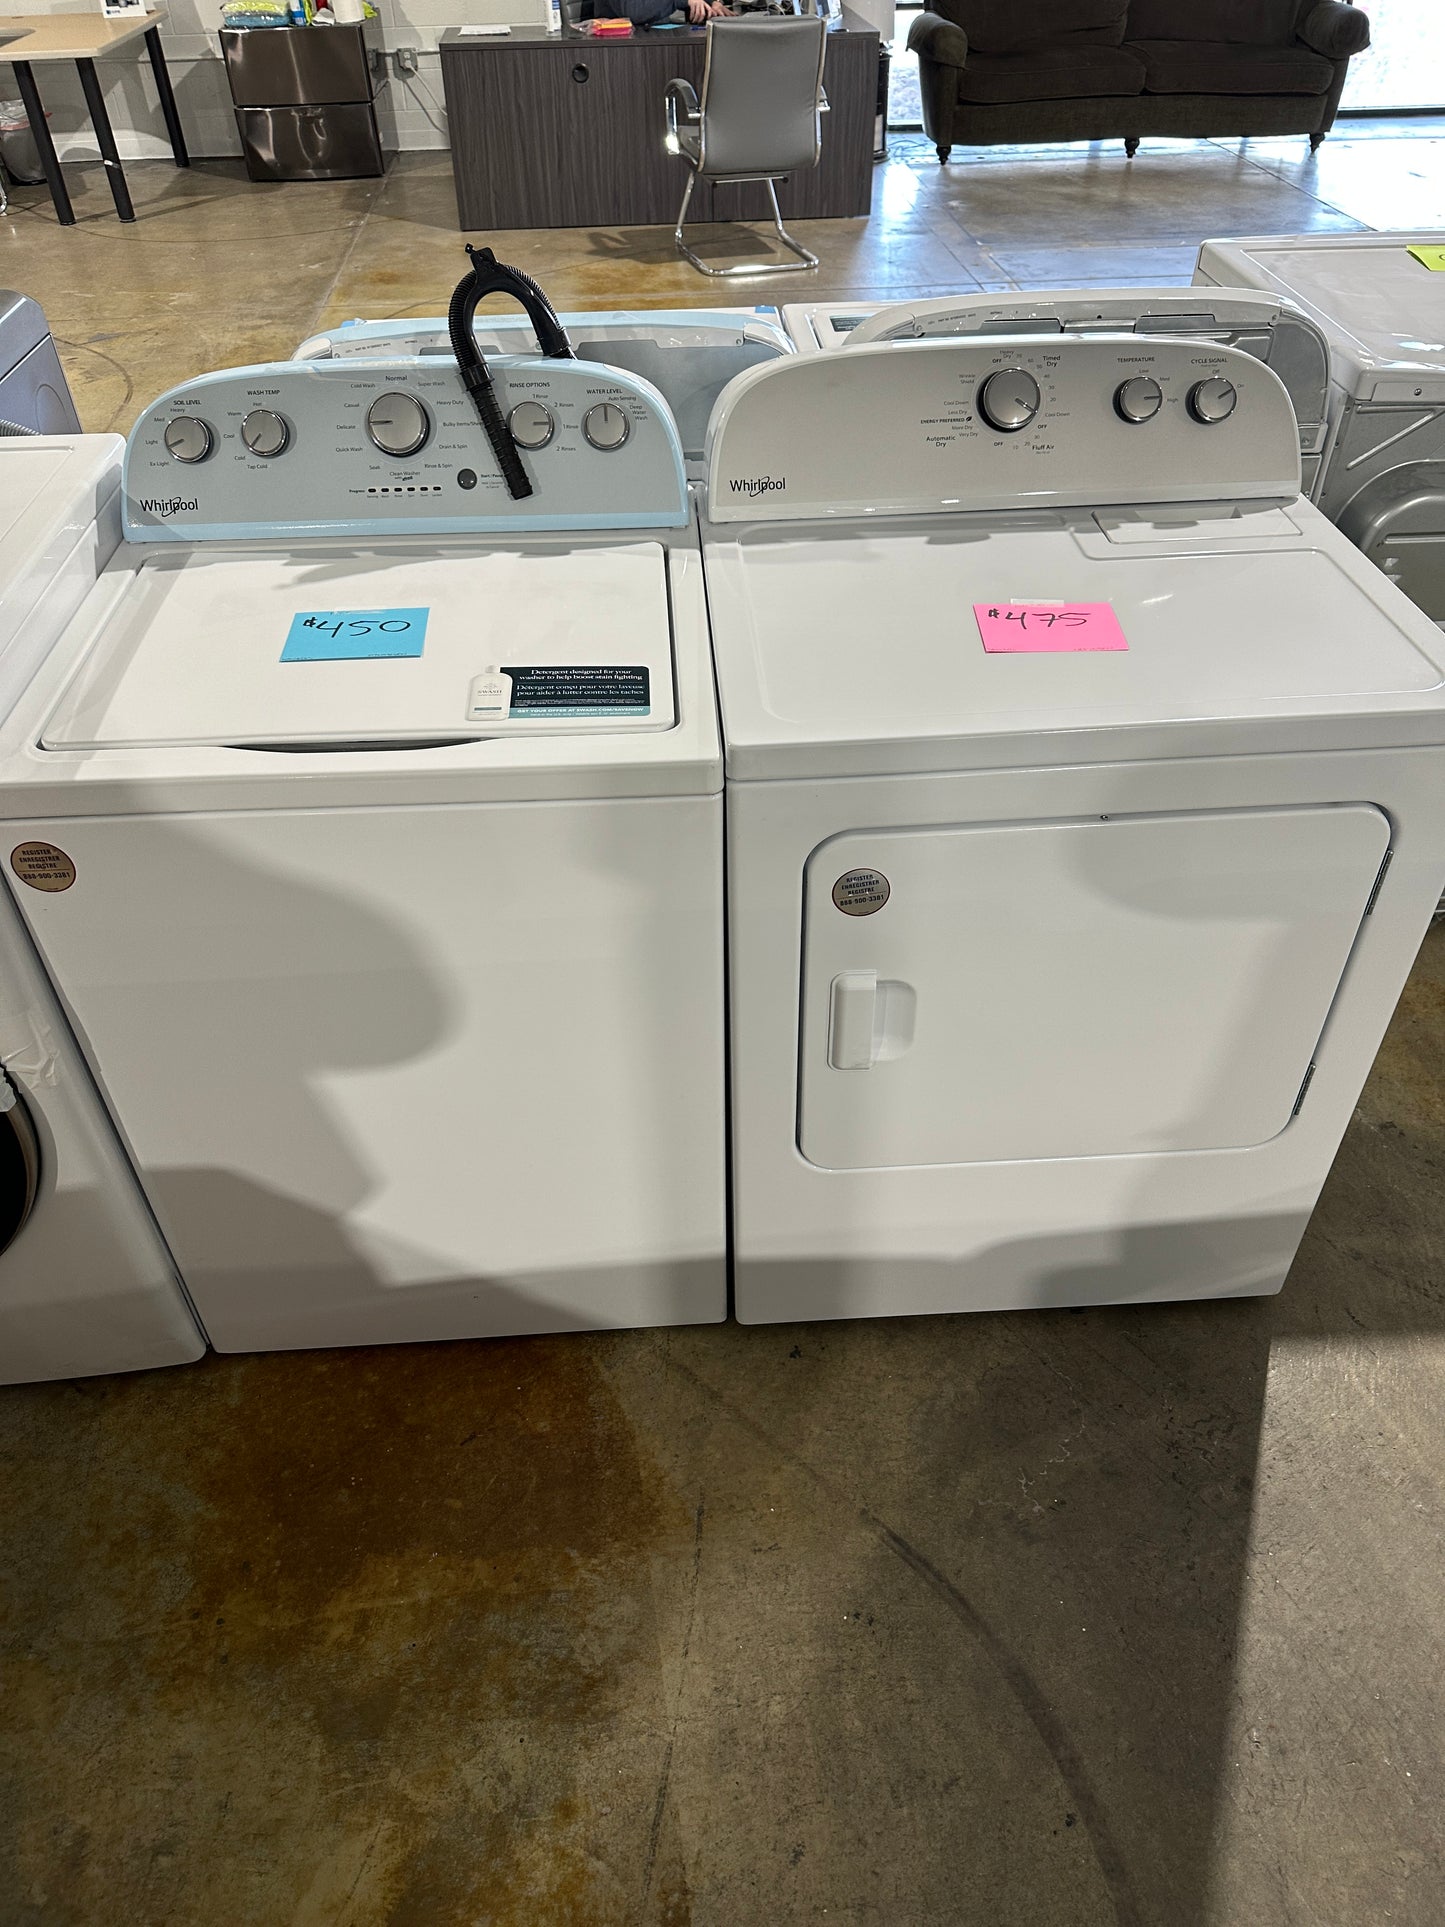 GORGEOUS NEW WHIRLPOOL LAUNDRY SET - WAS11850S DRY11712S